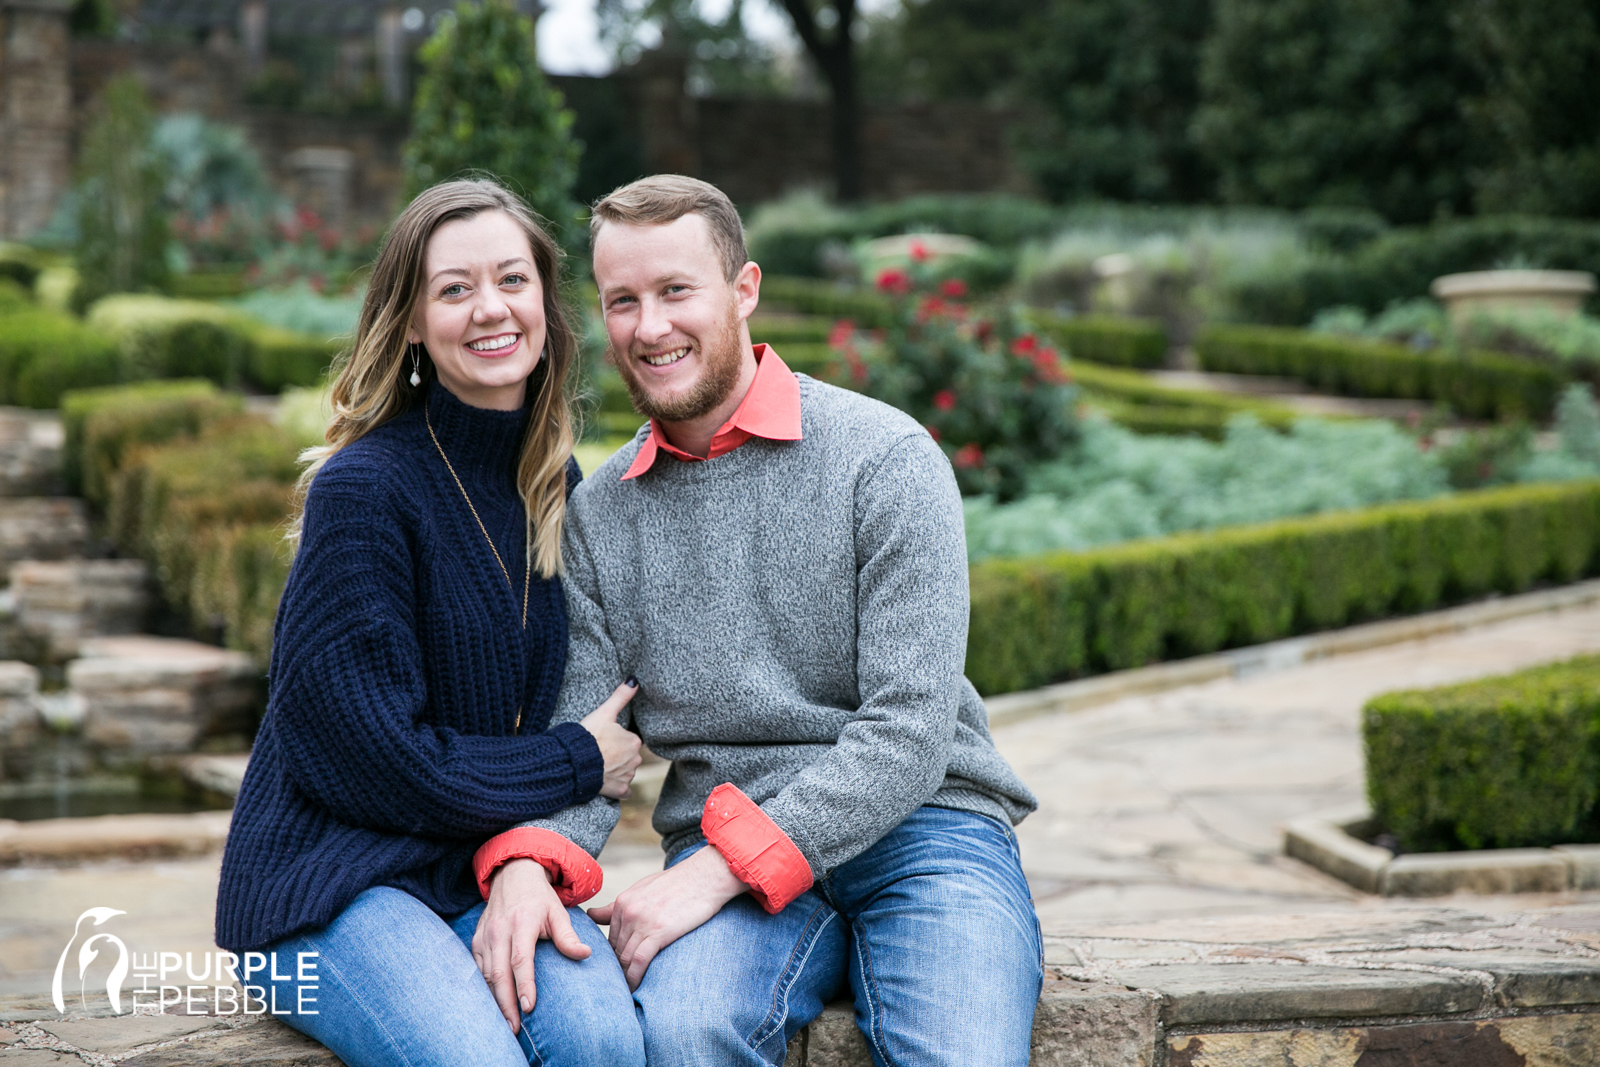 Fall Outdoor Engagement Session